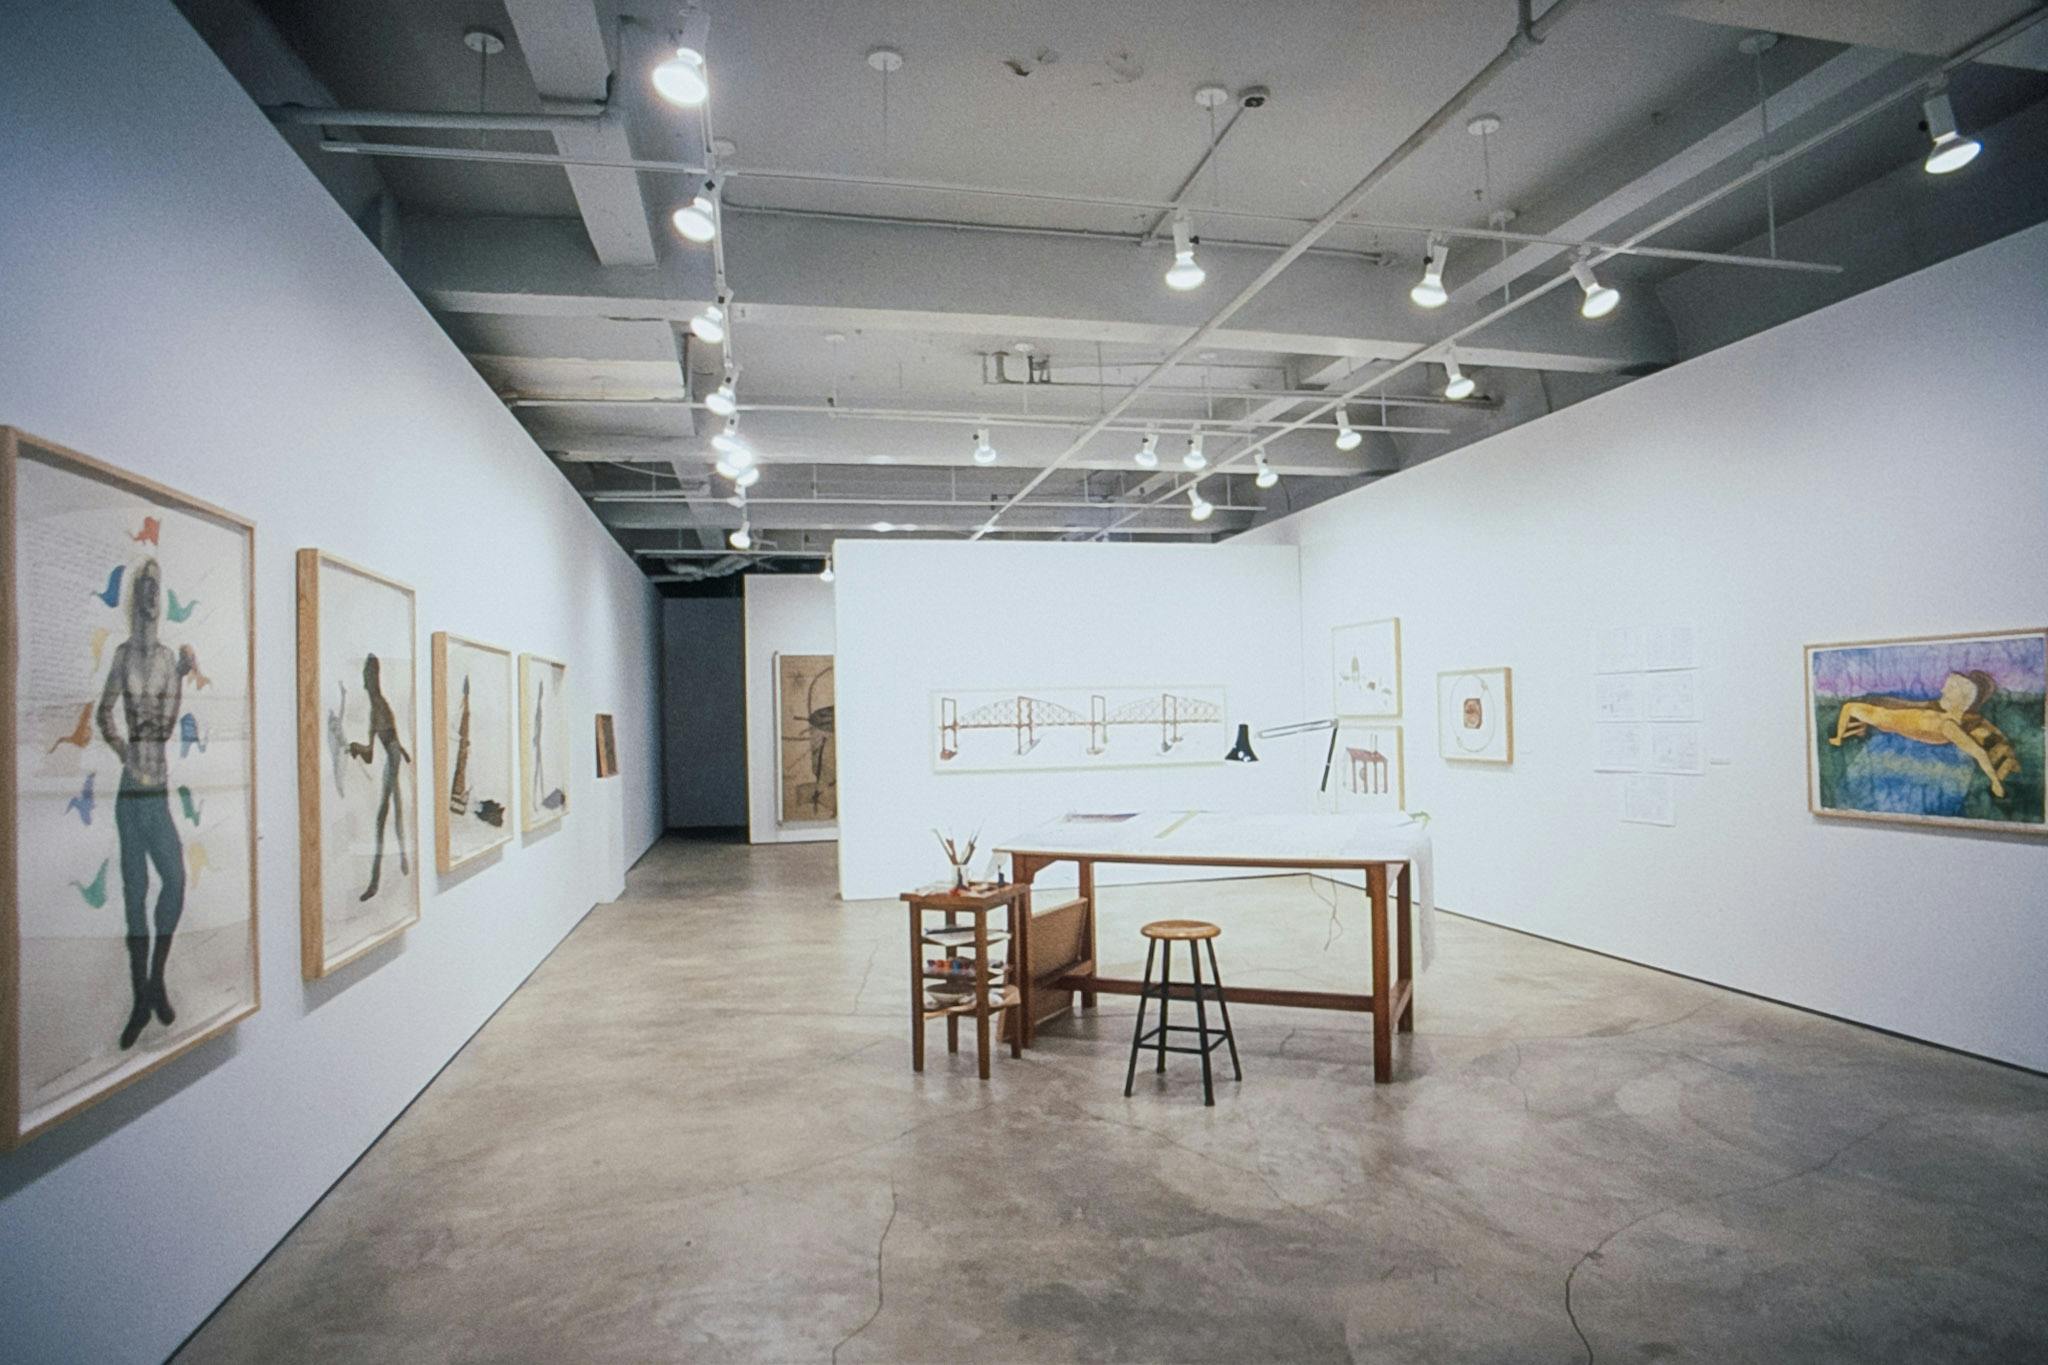 Various artworks are installed in the galley. Five drawings of human figures are mounted on the walls. A large wooden desk with a stool is installed in the middle of  the floor. 